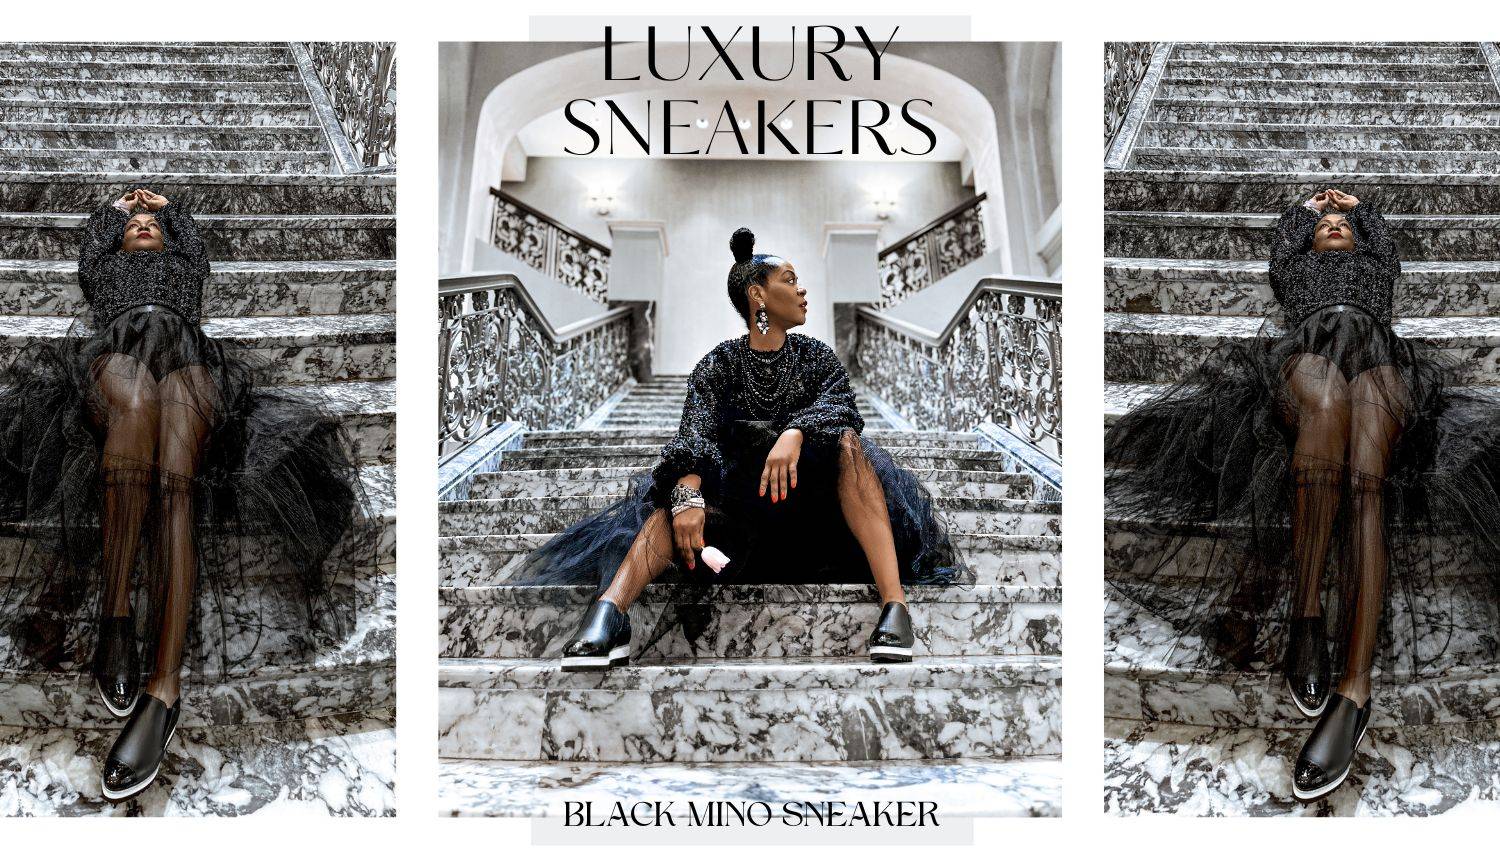 Triptych of African American woman on large marble staircase wearing black long ballerina tutu and Black Mino Sneakers by The Standard.